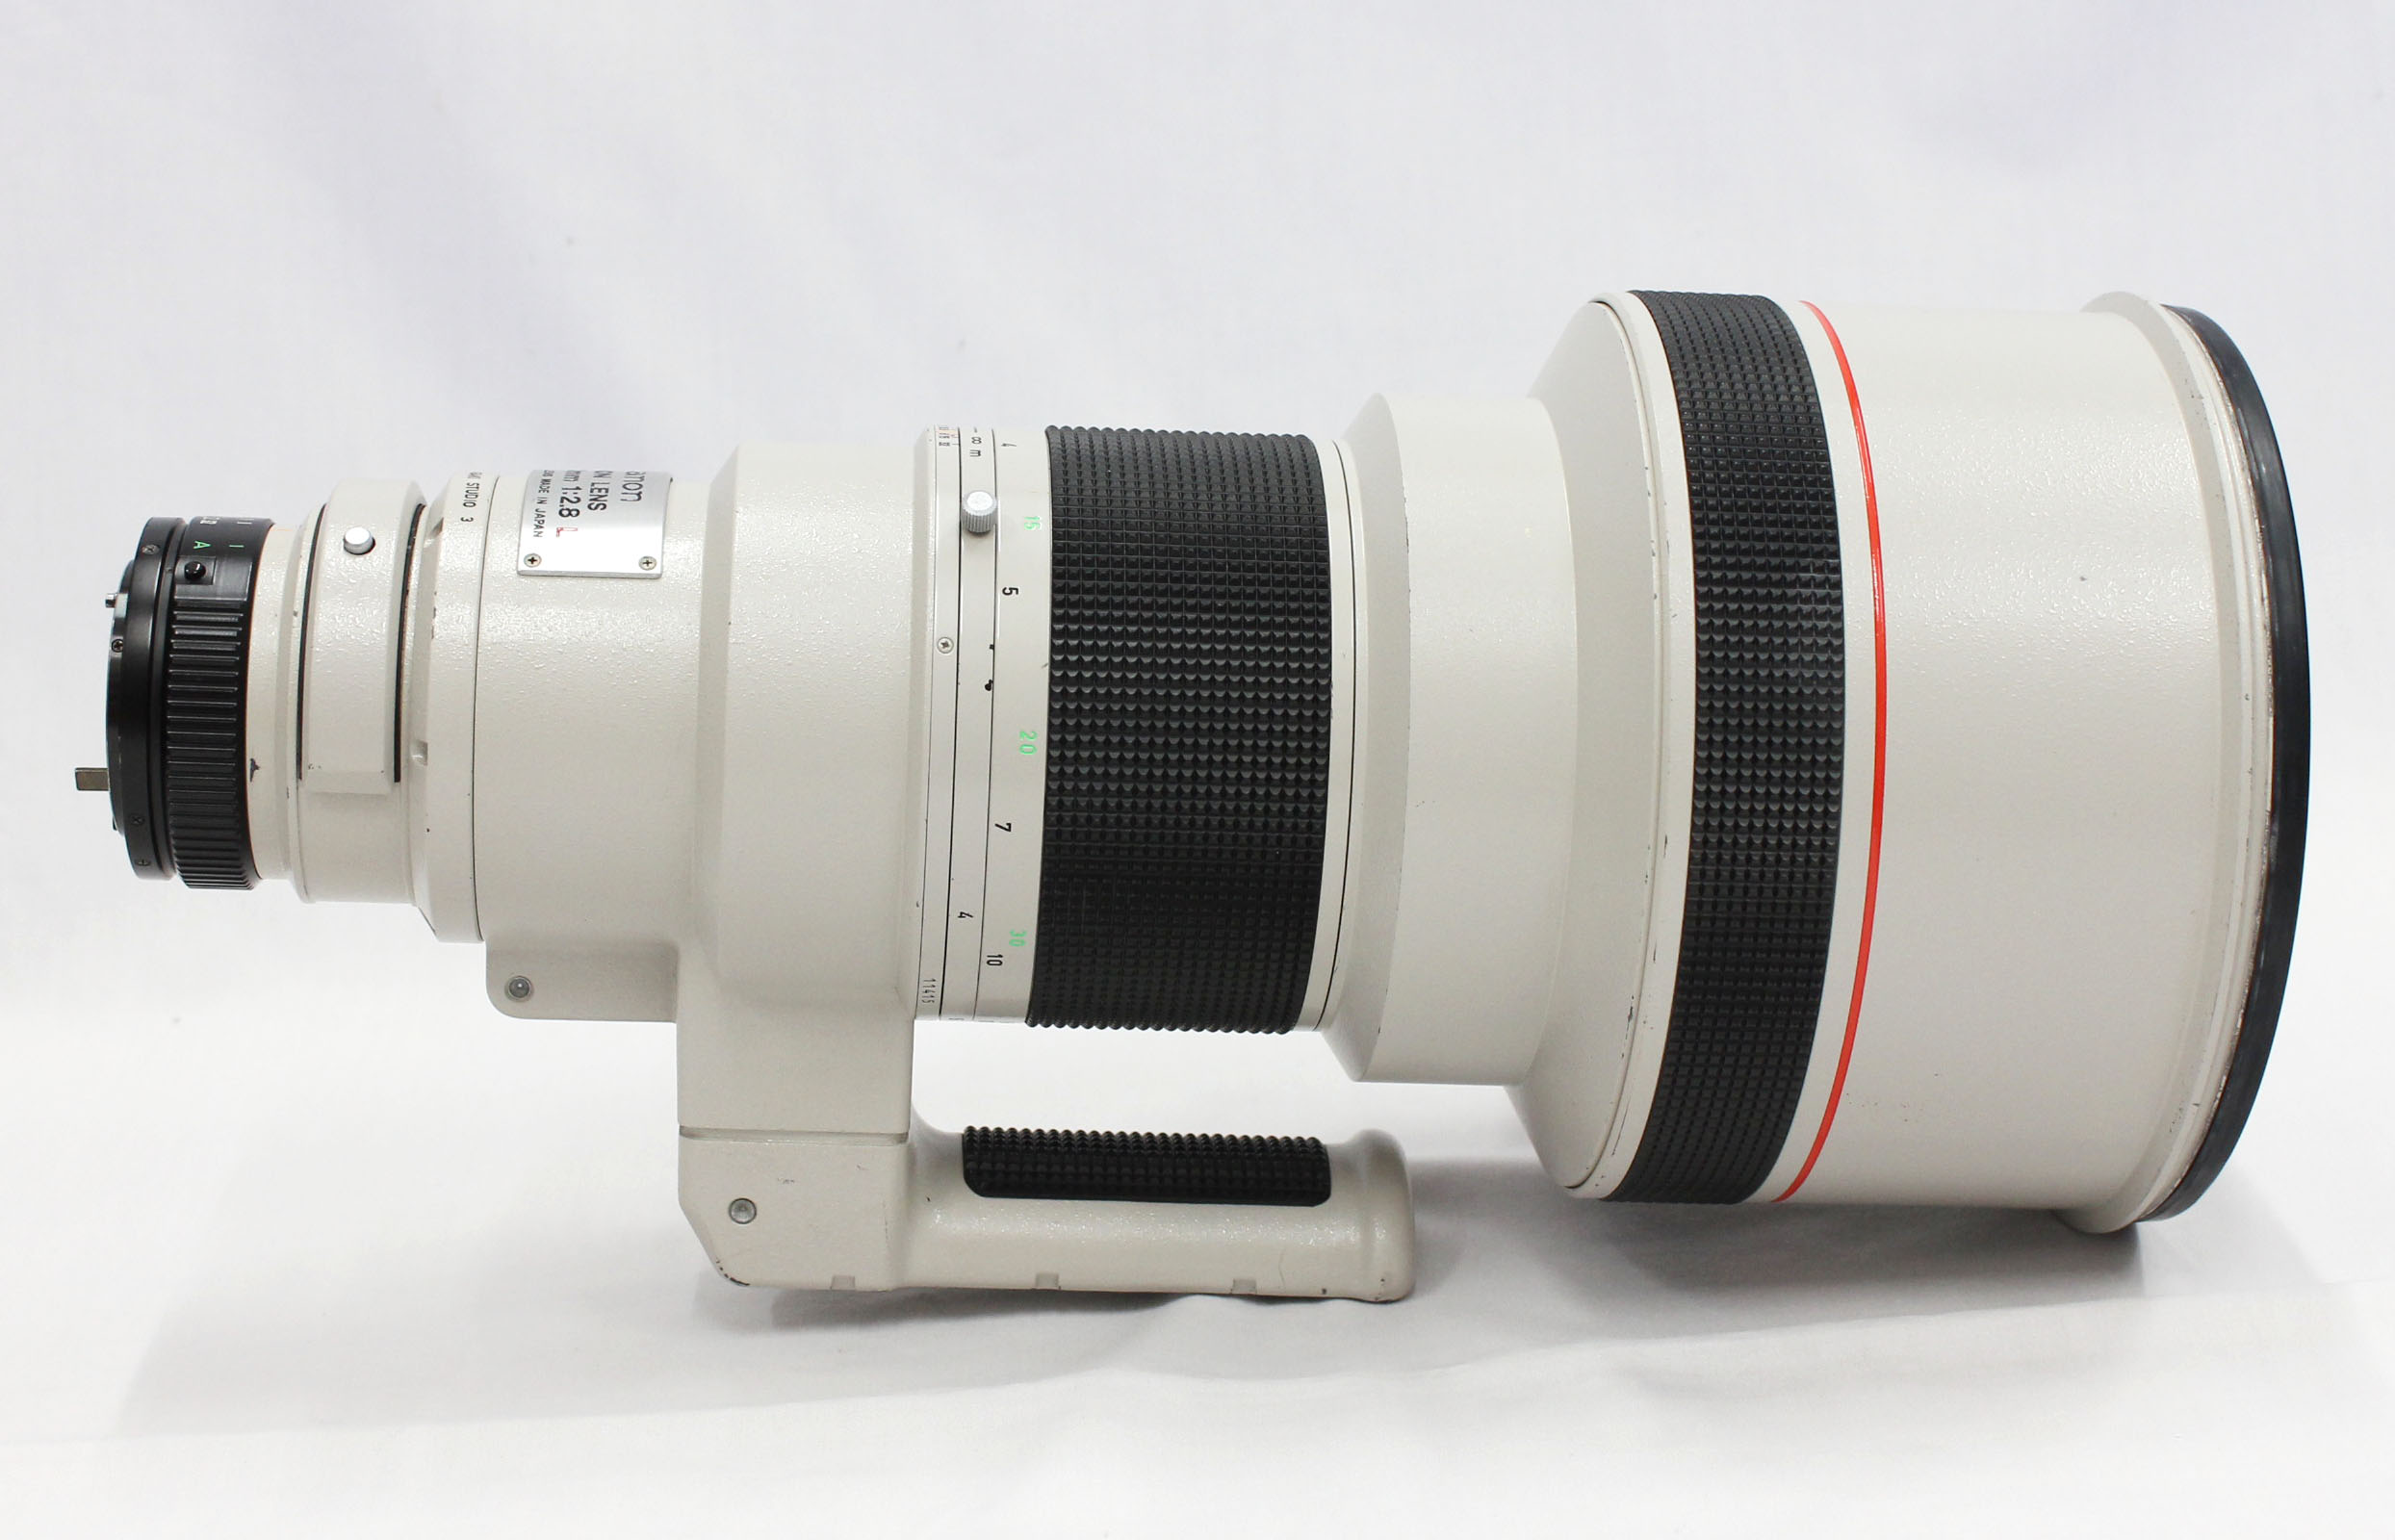  Canon New FD NFD 400mm F/2.8 L MF Telephoto Lens from Japan Photo 5